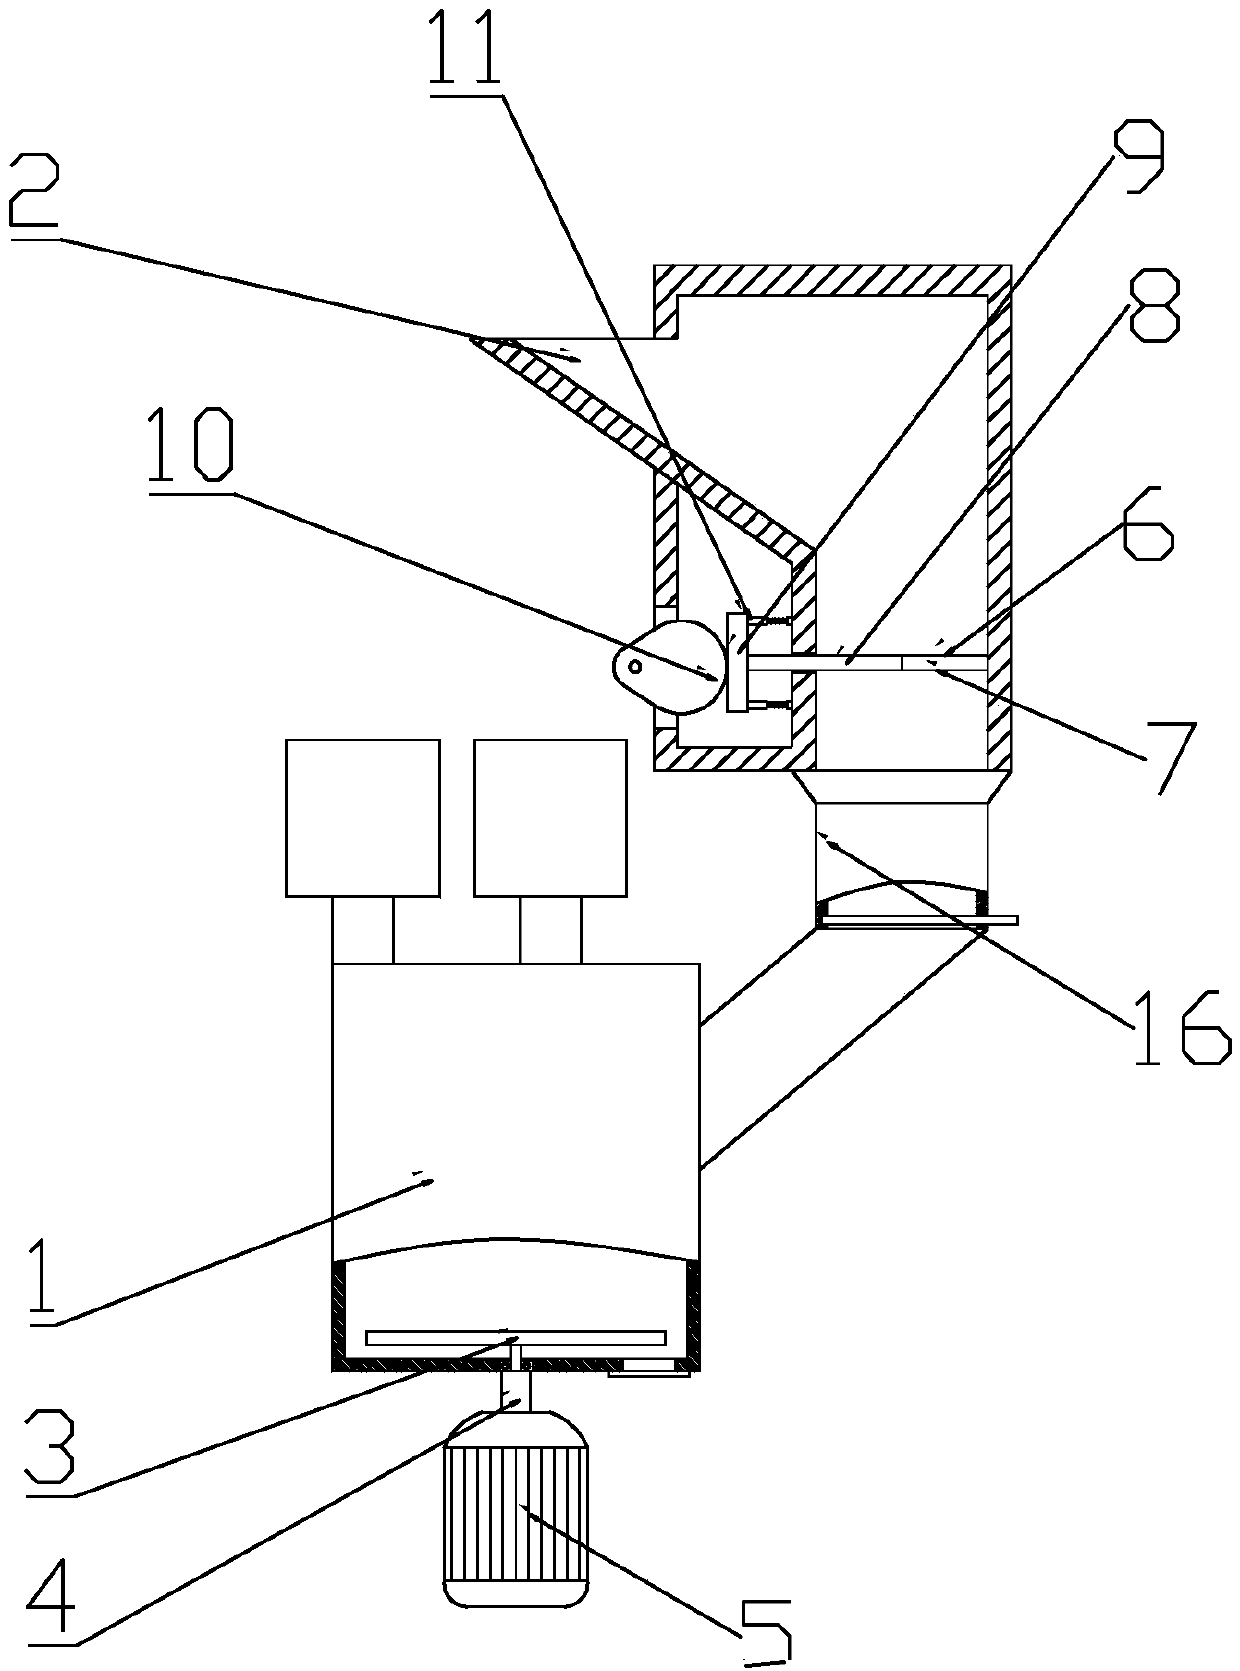 Feed mixing and crushing device for agriculture